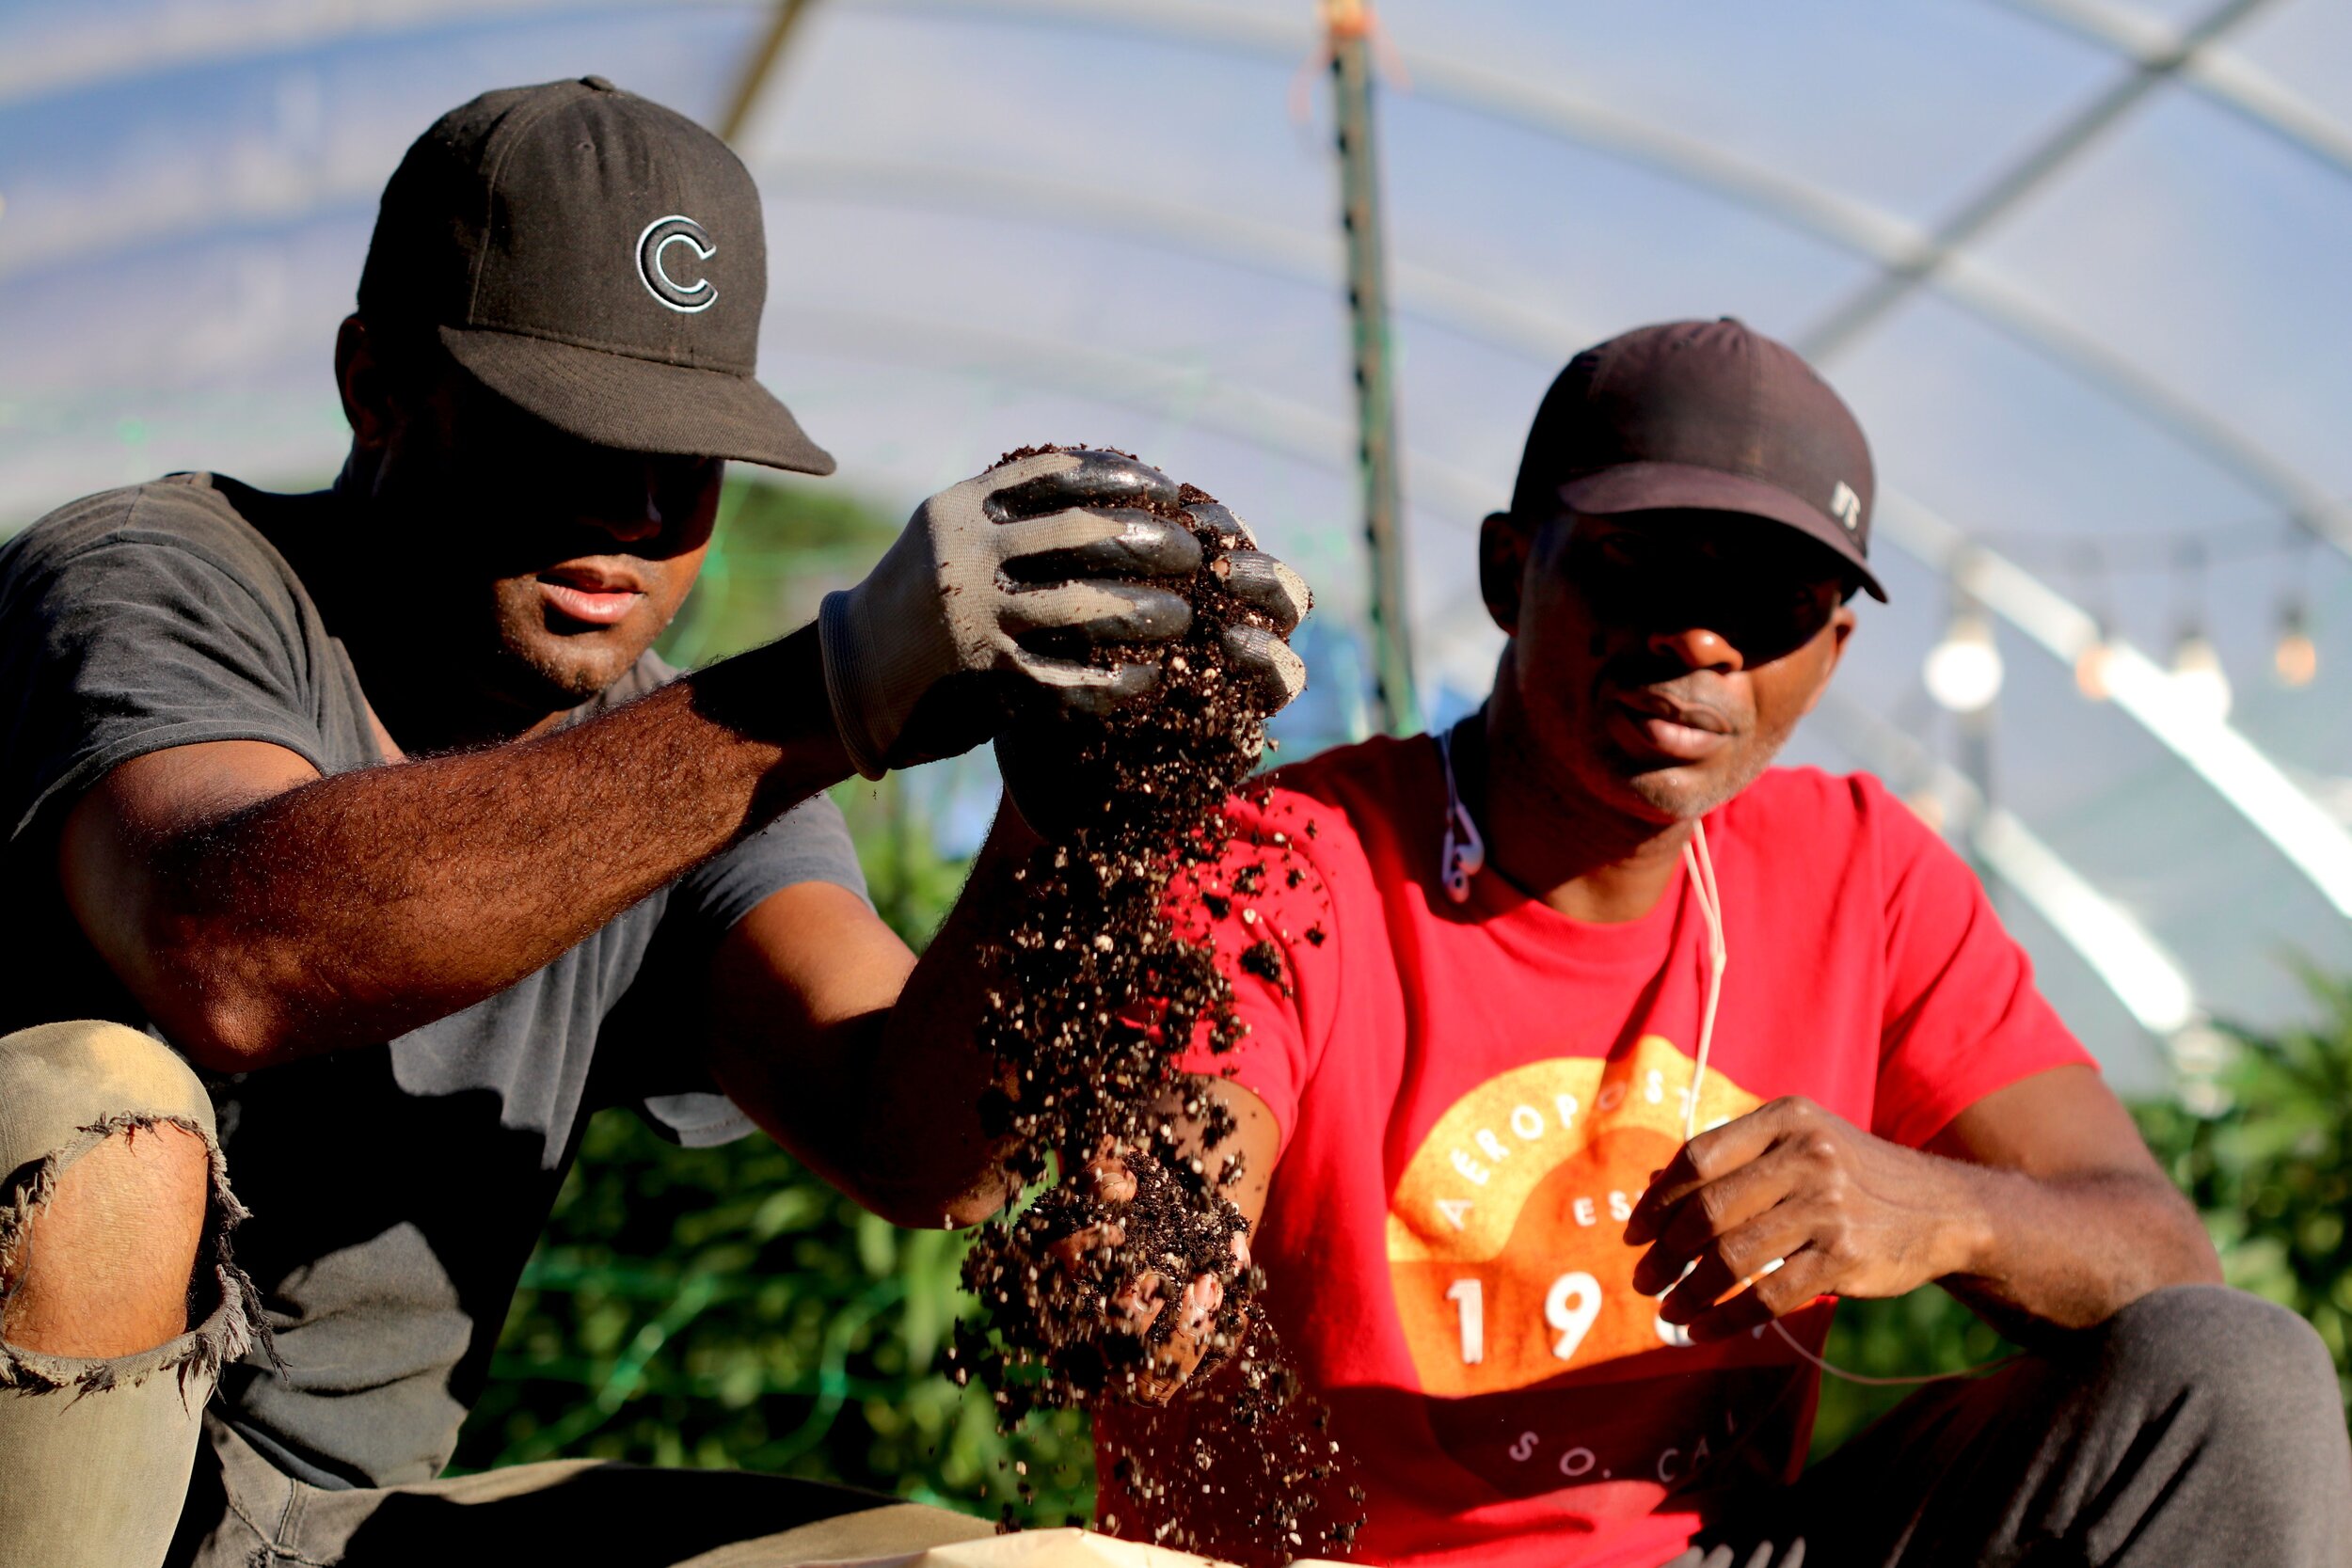  Two farm team members, wearing a dark grey shirt and a red shirt, holding soil in their hands with a hoop house behind them.  